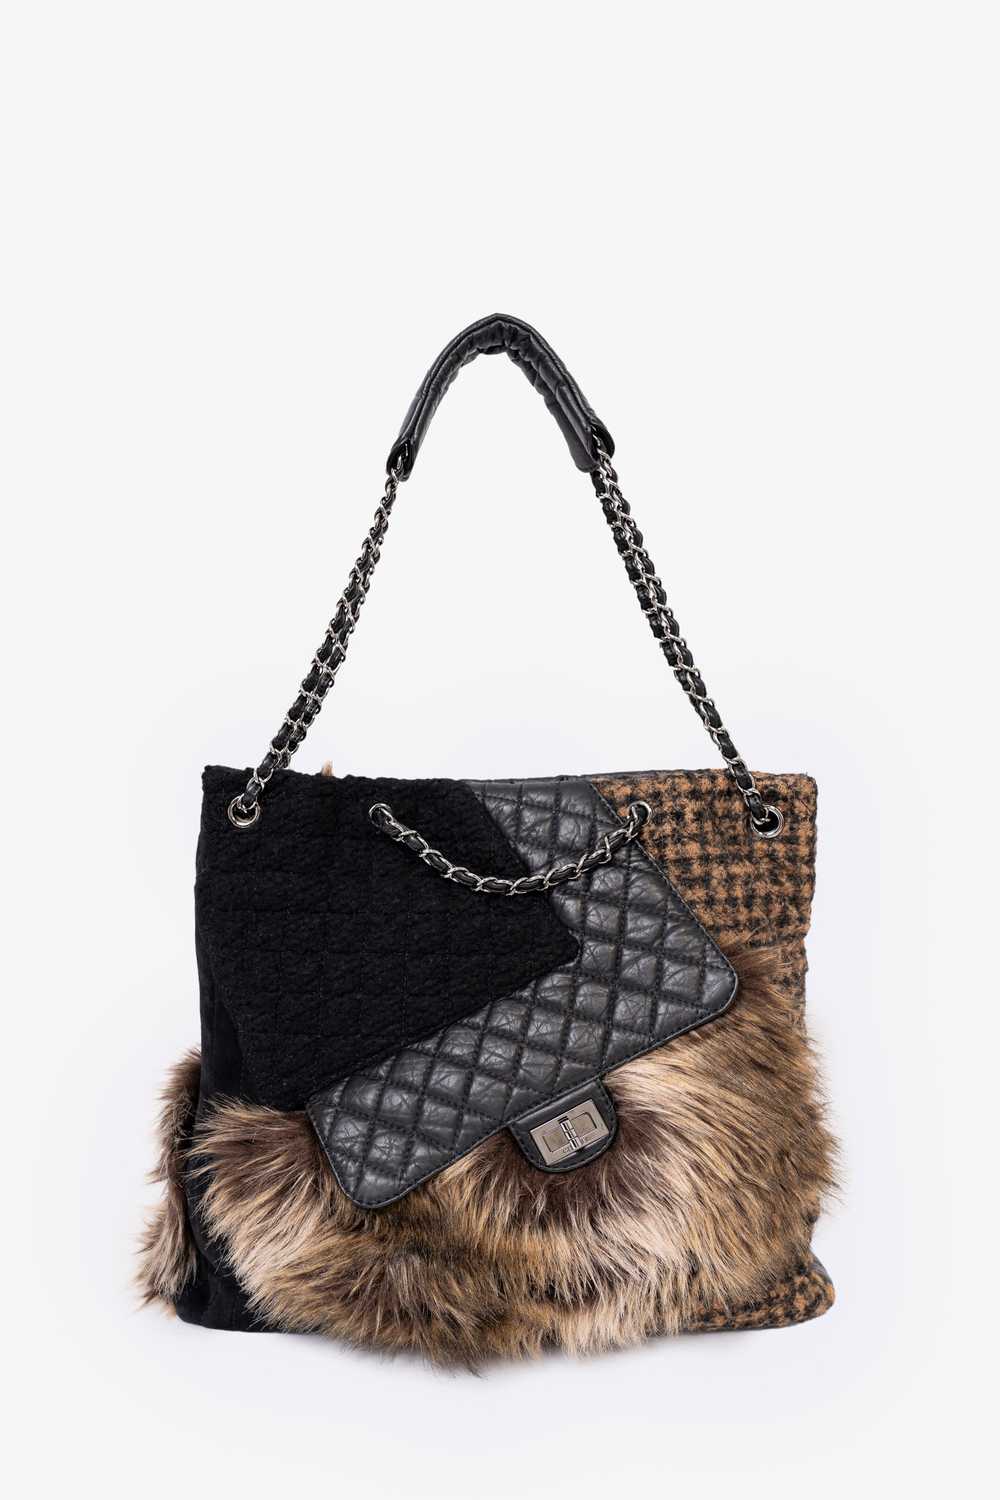 Pre-loved Chanel™ 2009-2010 Leather/Faux Fur Fant… - image 3